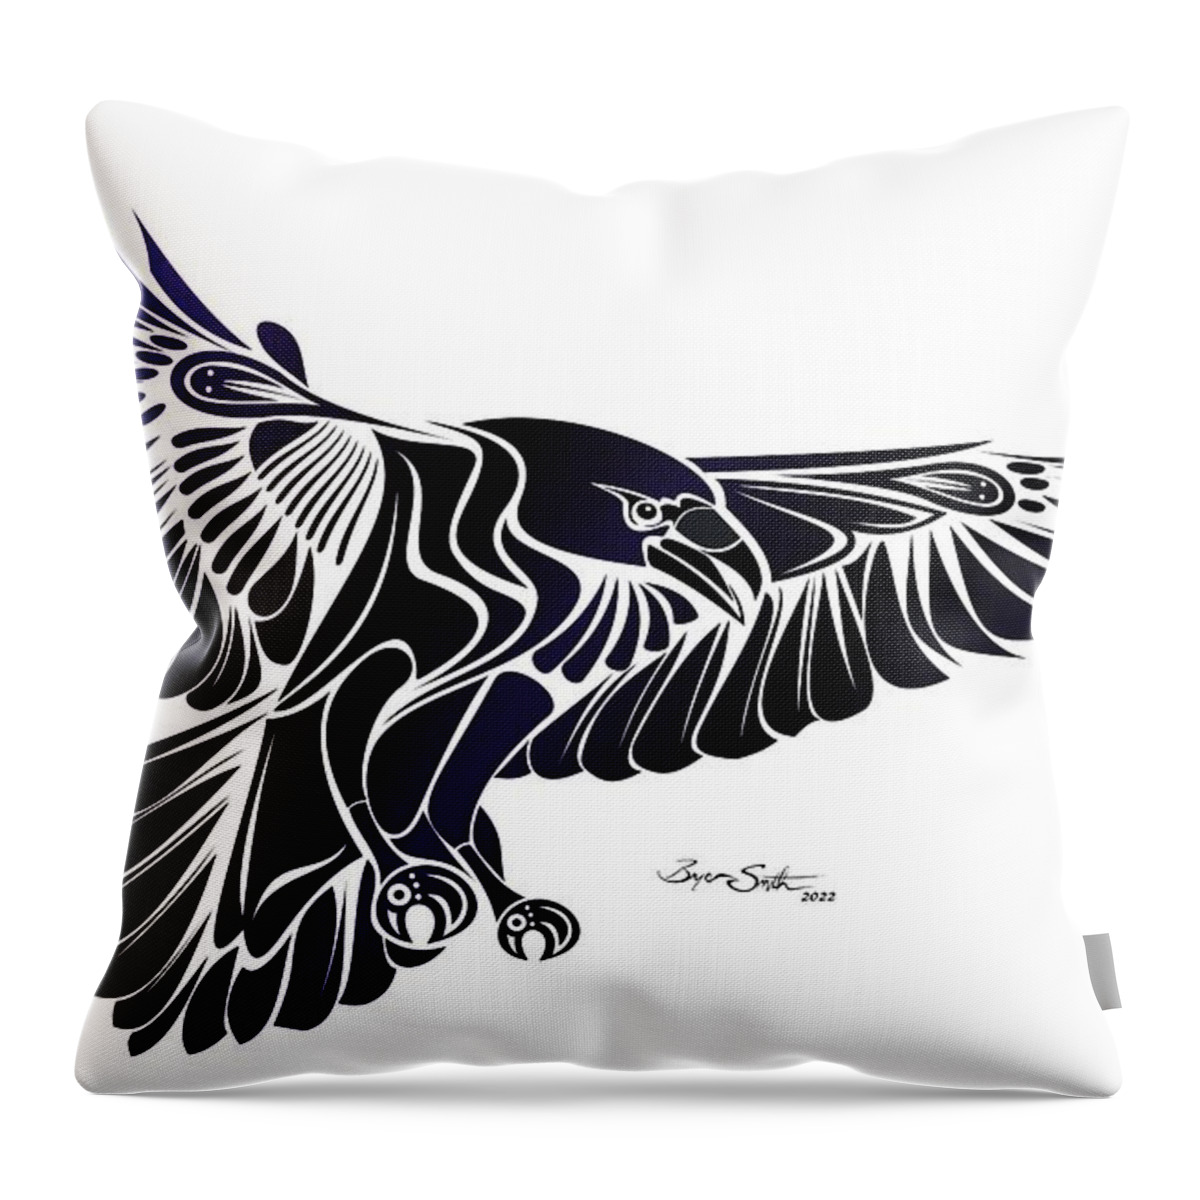 Raven Throw Pillow featuring the digital art Raven Flight by Bryan Smith